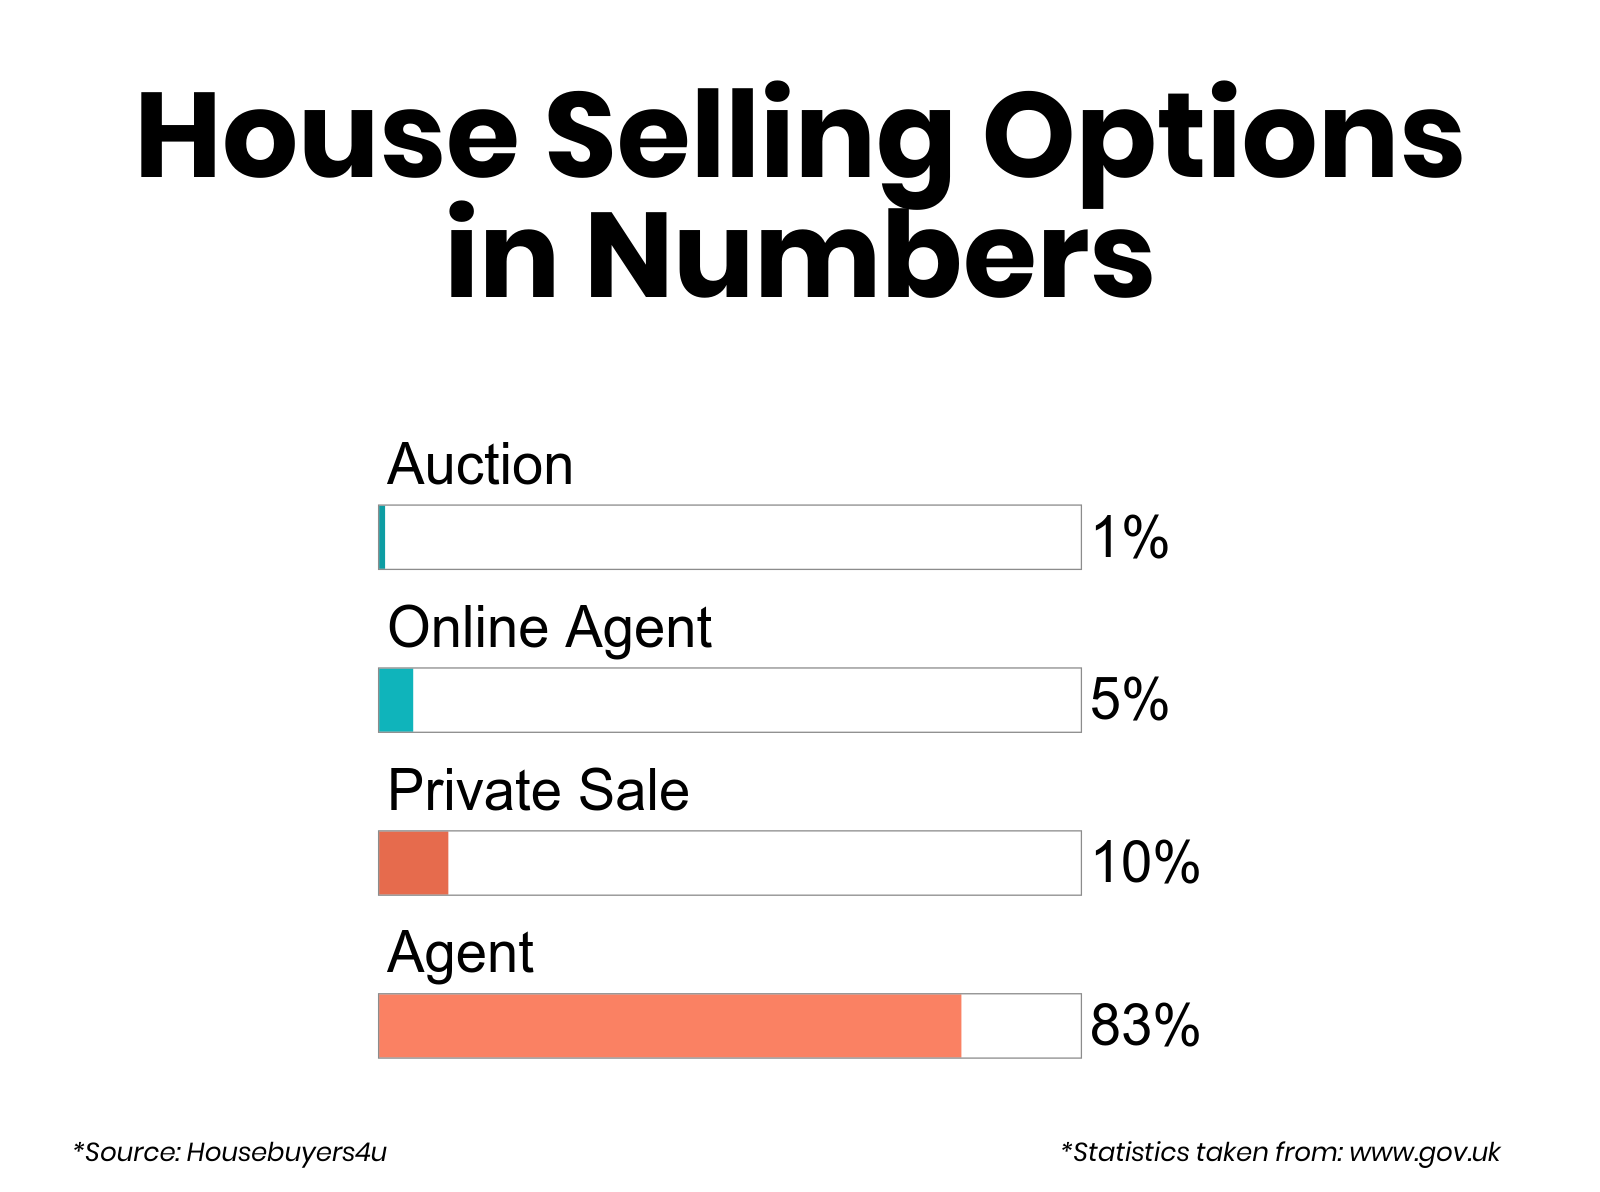 The different house selling options in percentages